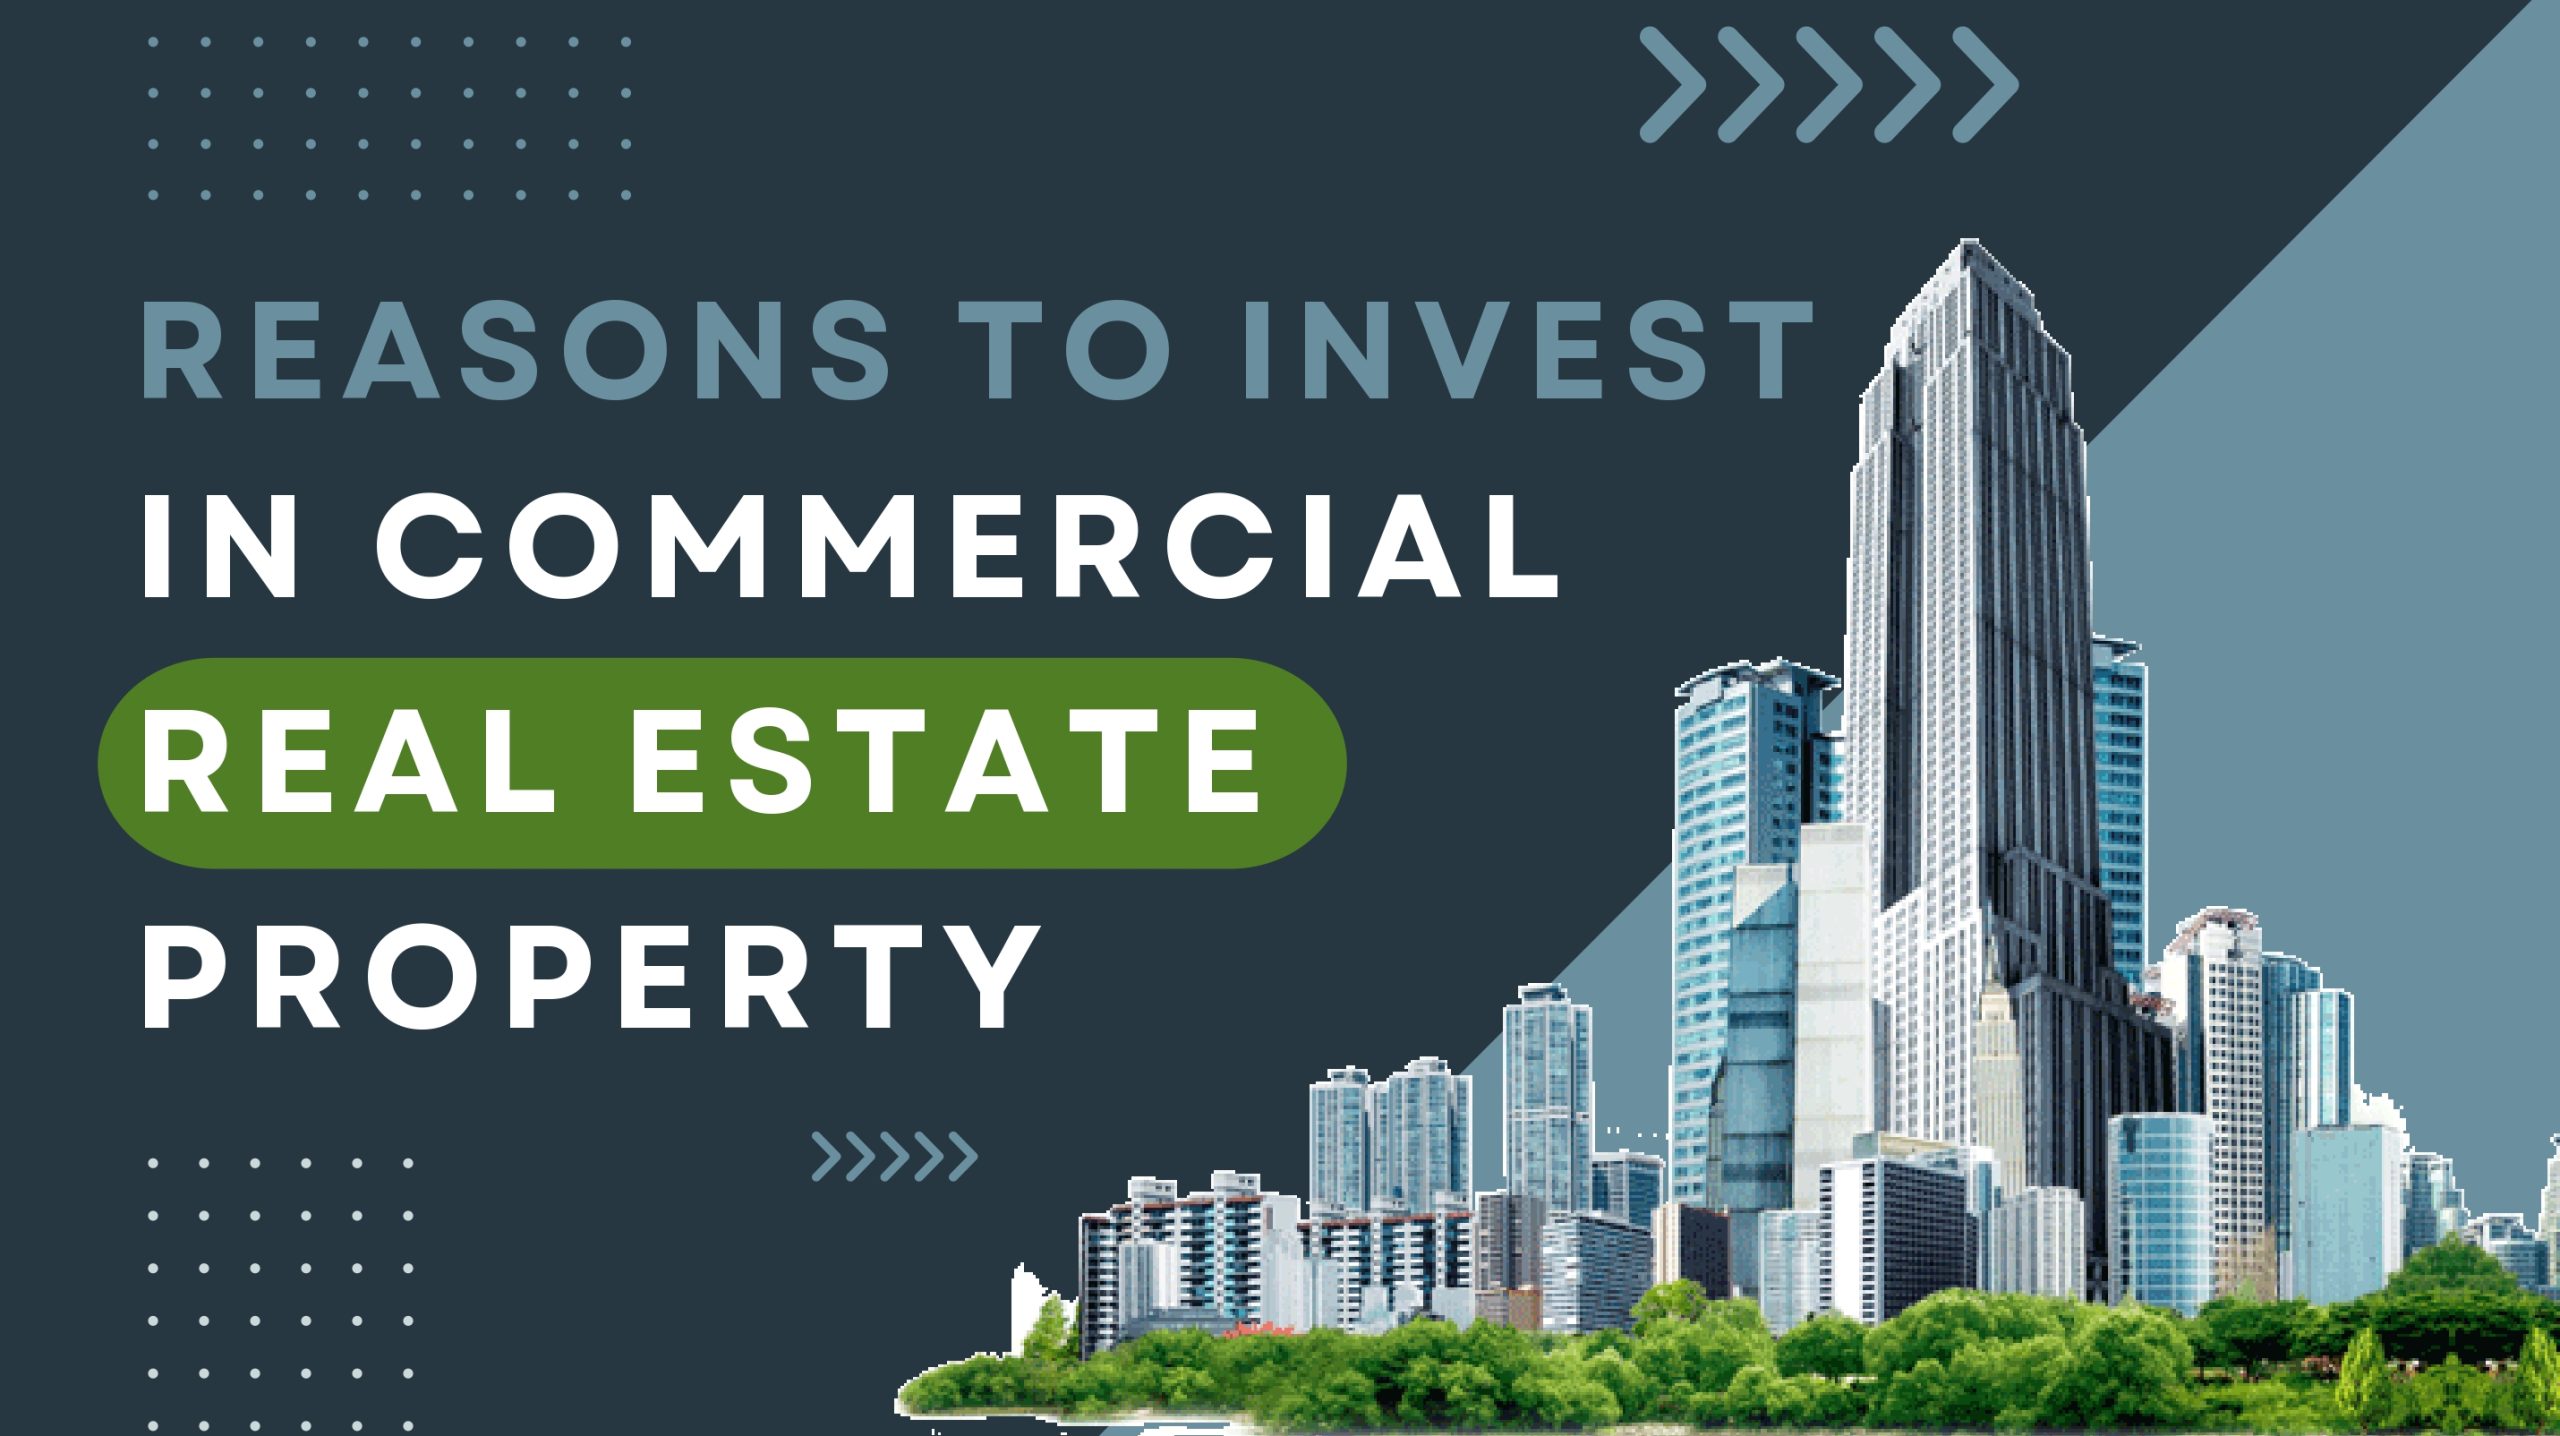 Reasons To Invest In Commercial Real Estate Property